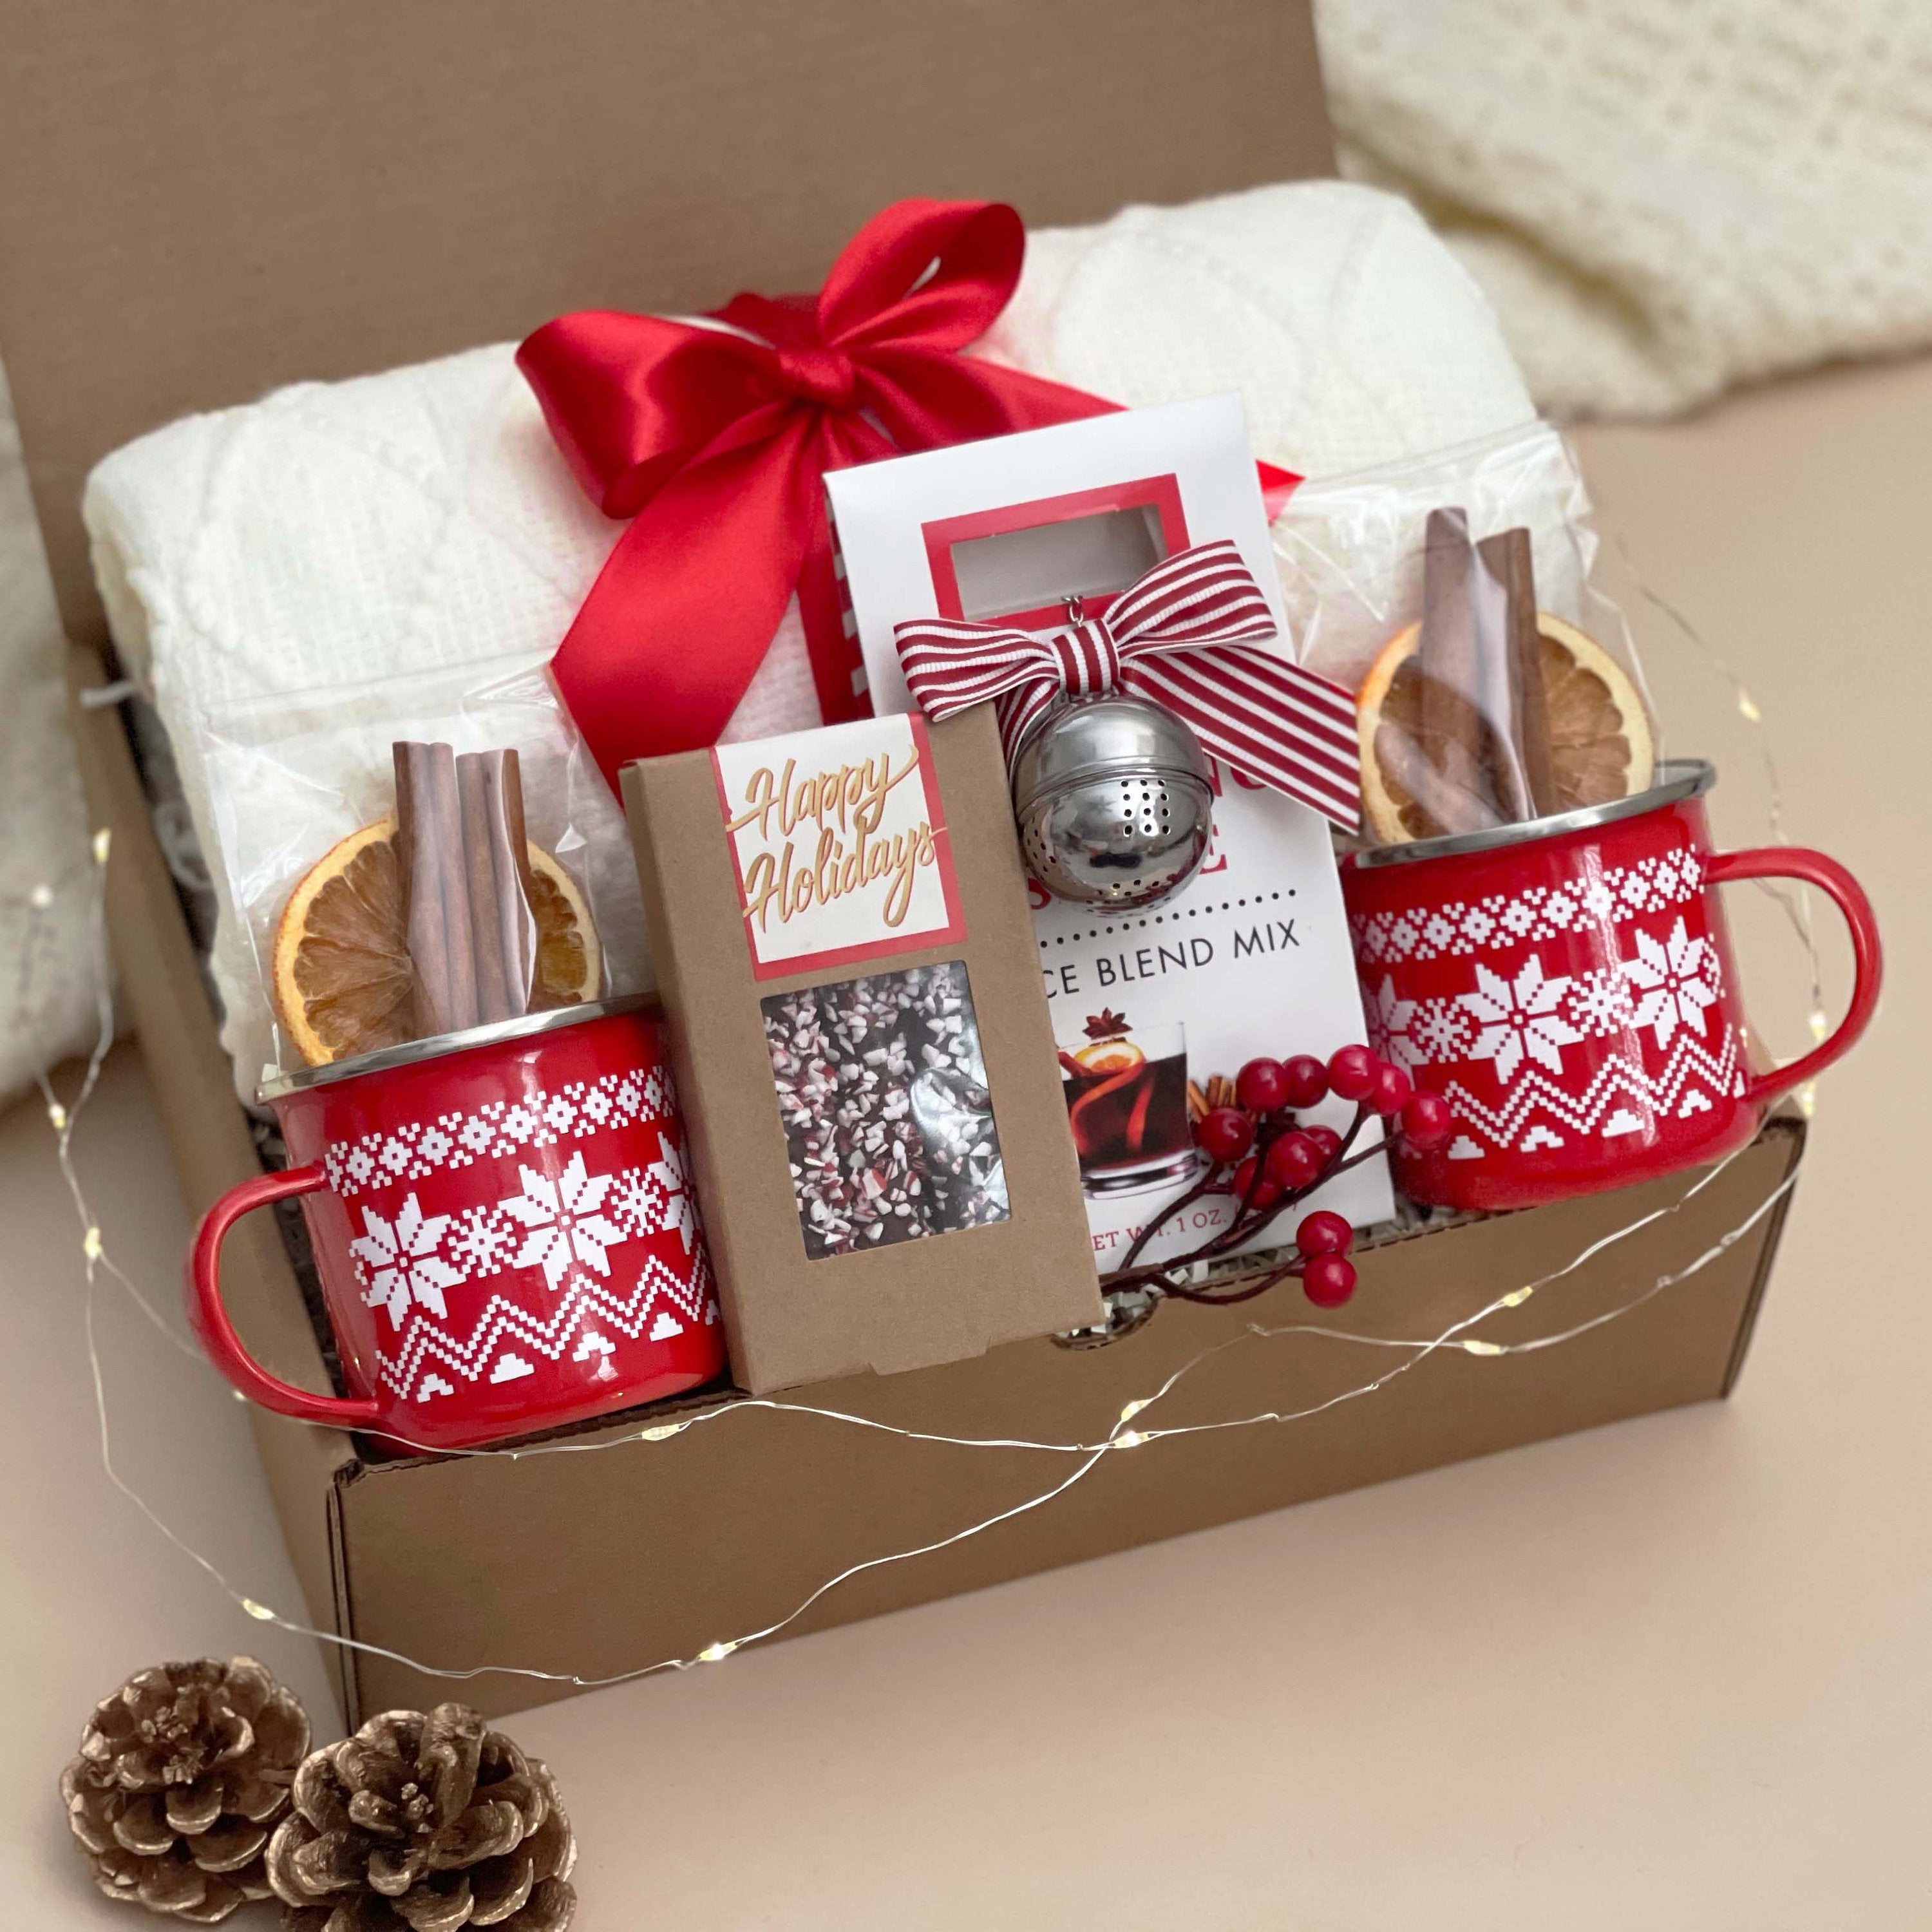 Winter Mulled Wine Spices Kit Gift Box or Sample Warm Spices Gift Set Gift  for Wine Lover, Christmas Atmosphere Secret Santa Gift 